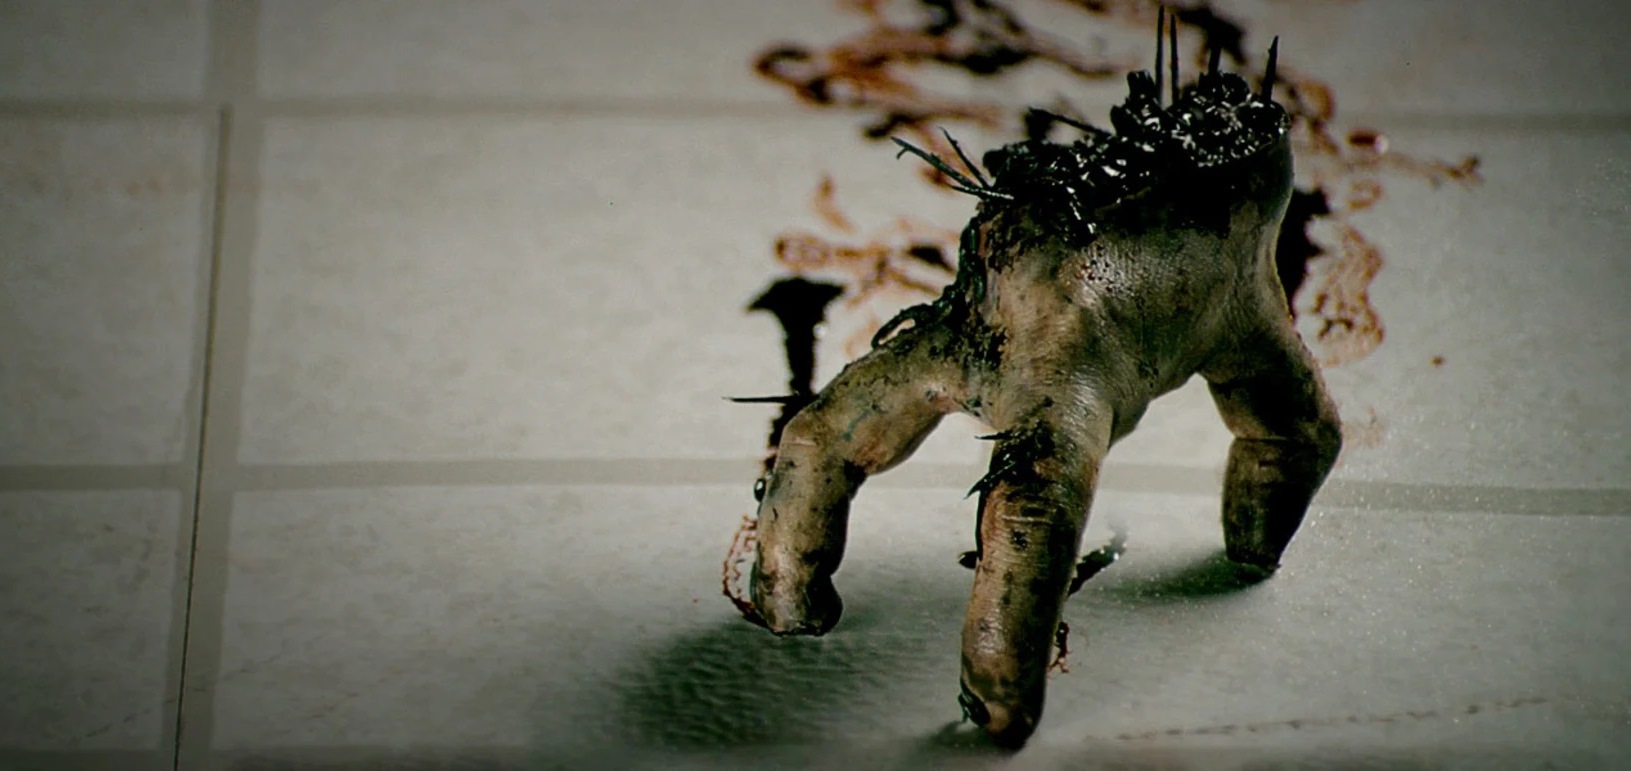 The infected severed hand in Splinter (2008)